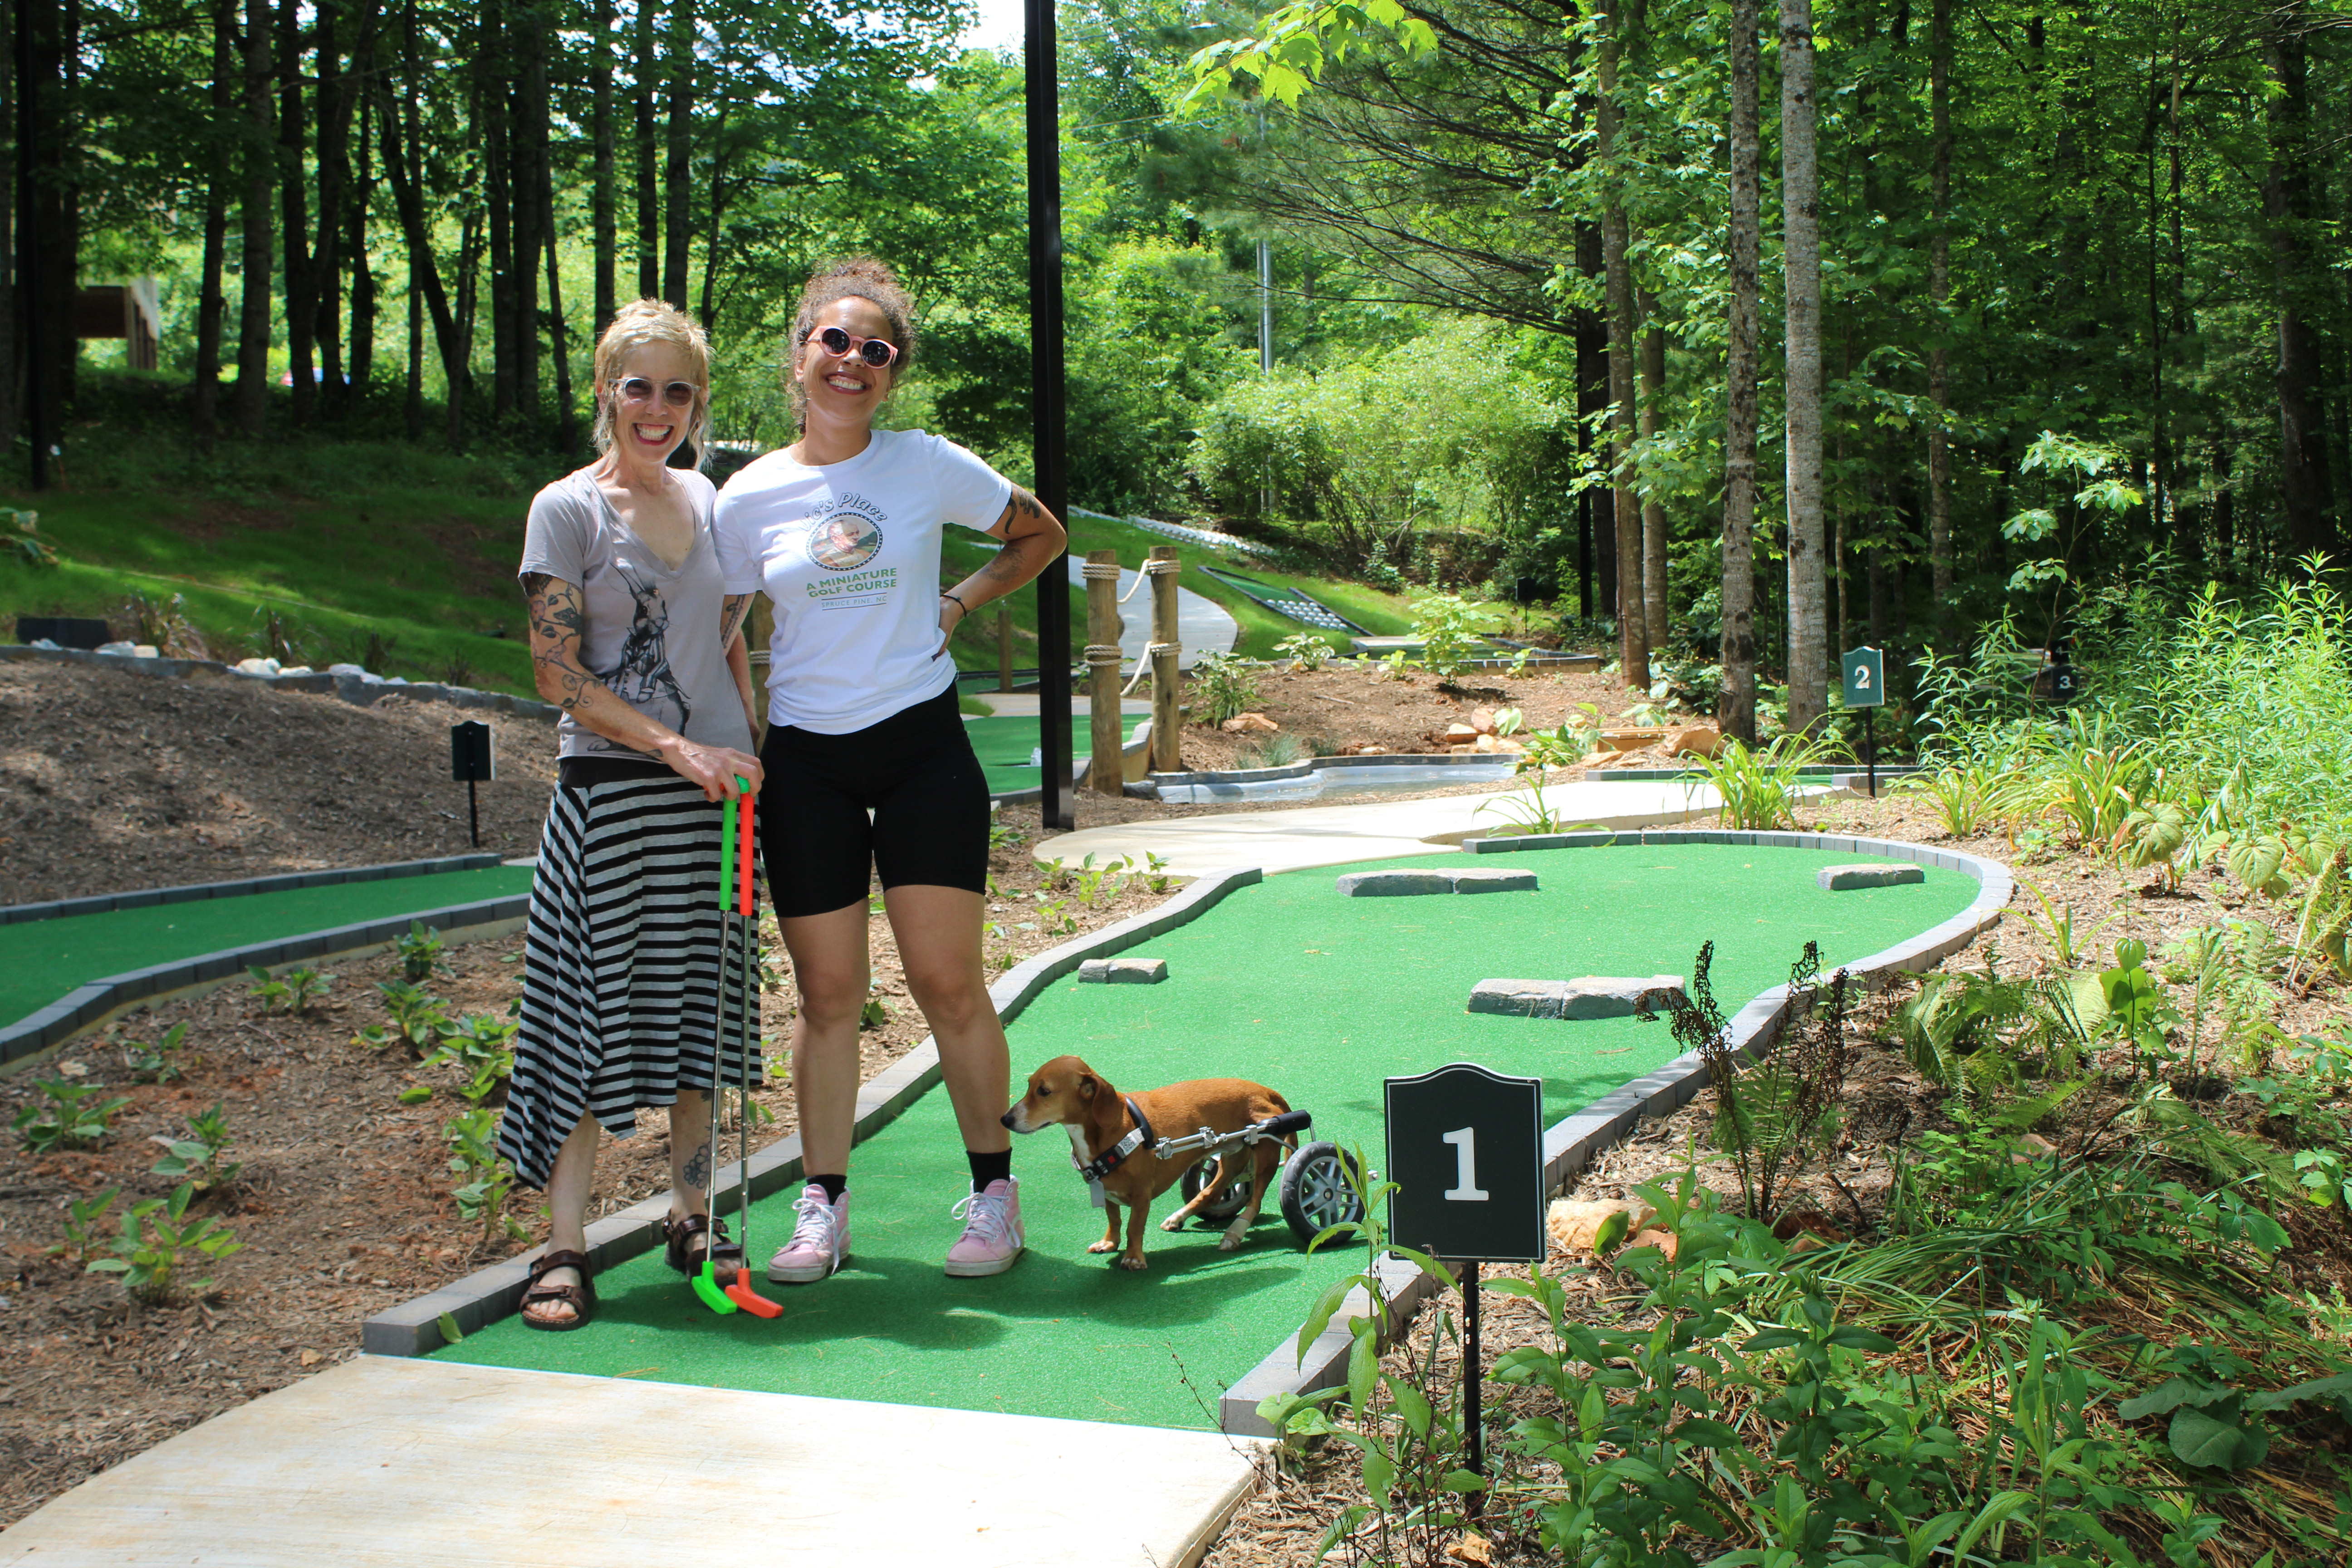 Kim and Logan Oberhammer at Vic's Place Mini Golf Course.